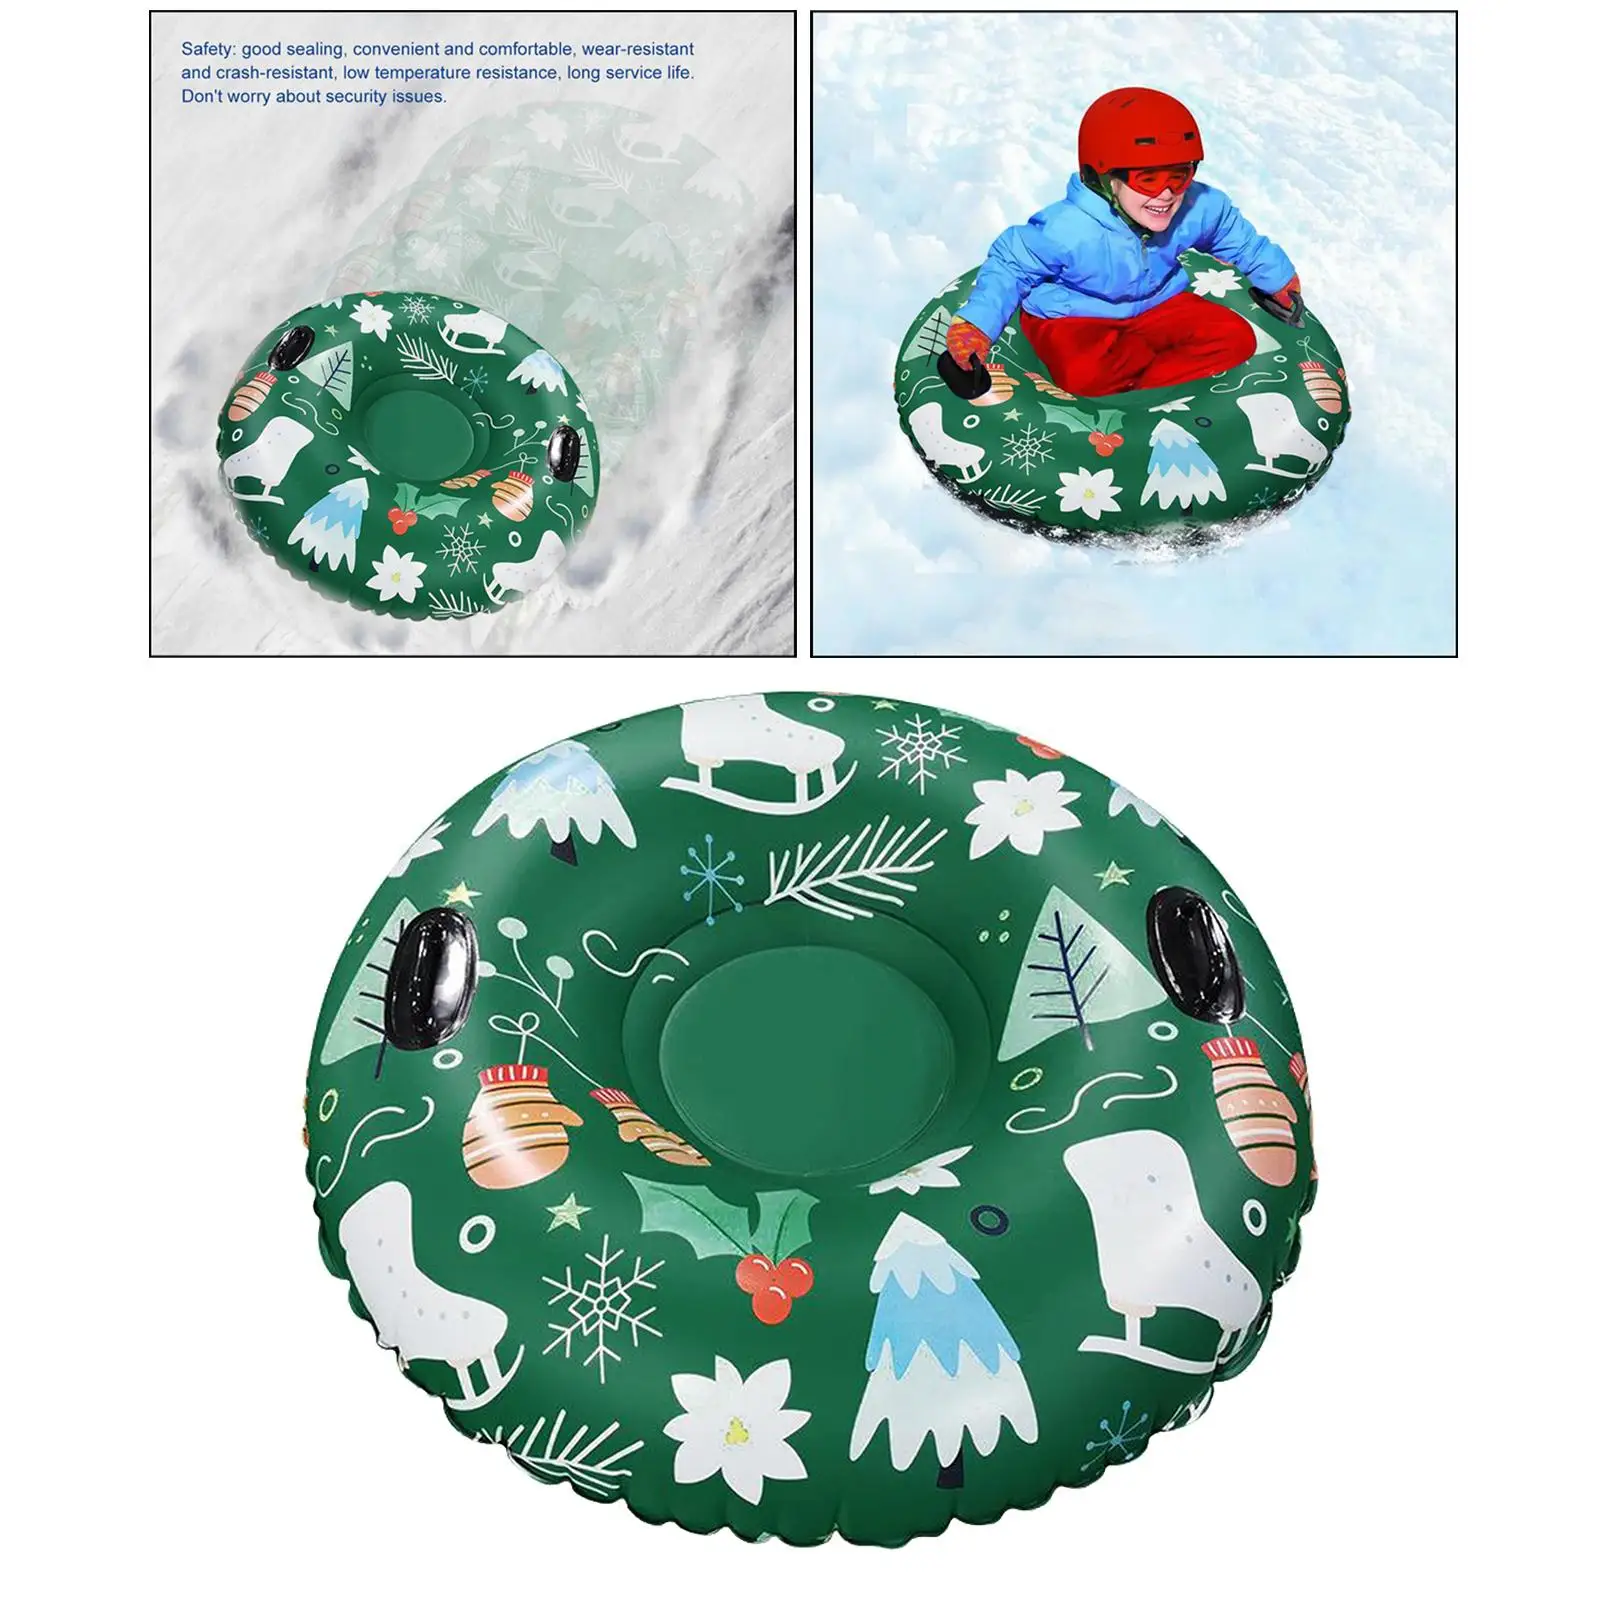  47 `` Inflatable Snow Sled Children Adults Heavy Duty Snow Tube